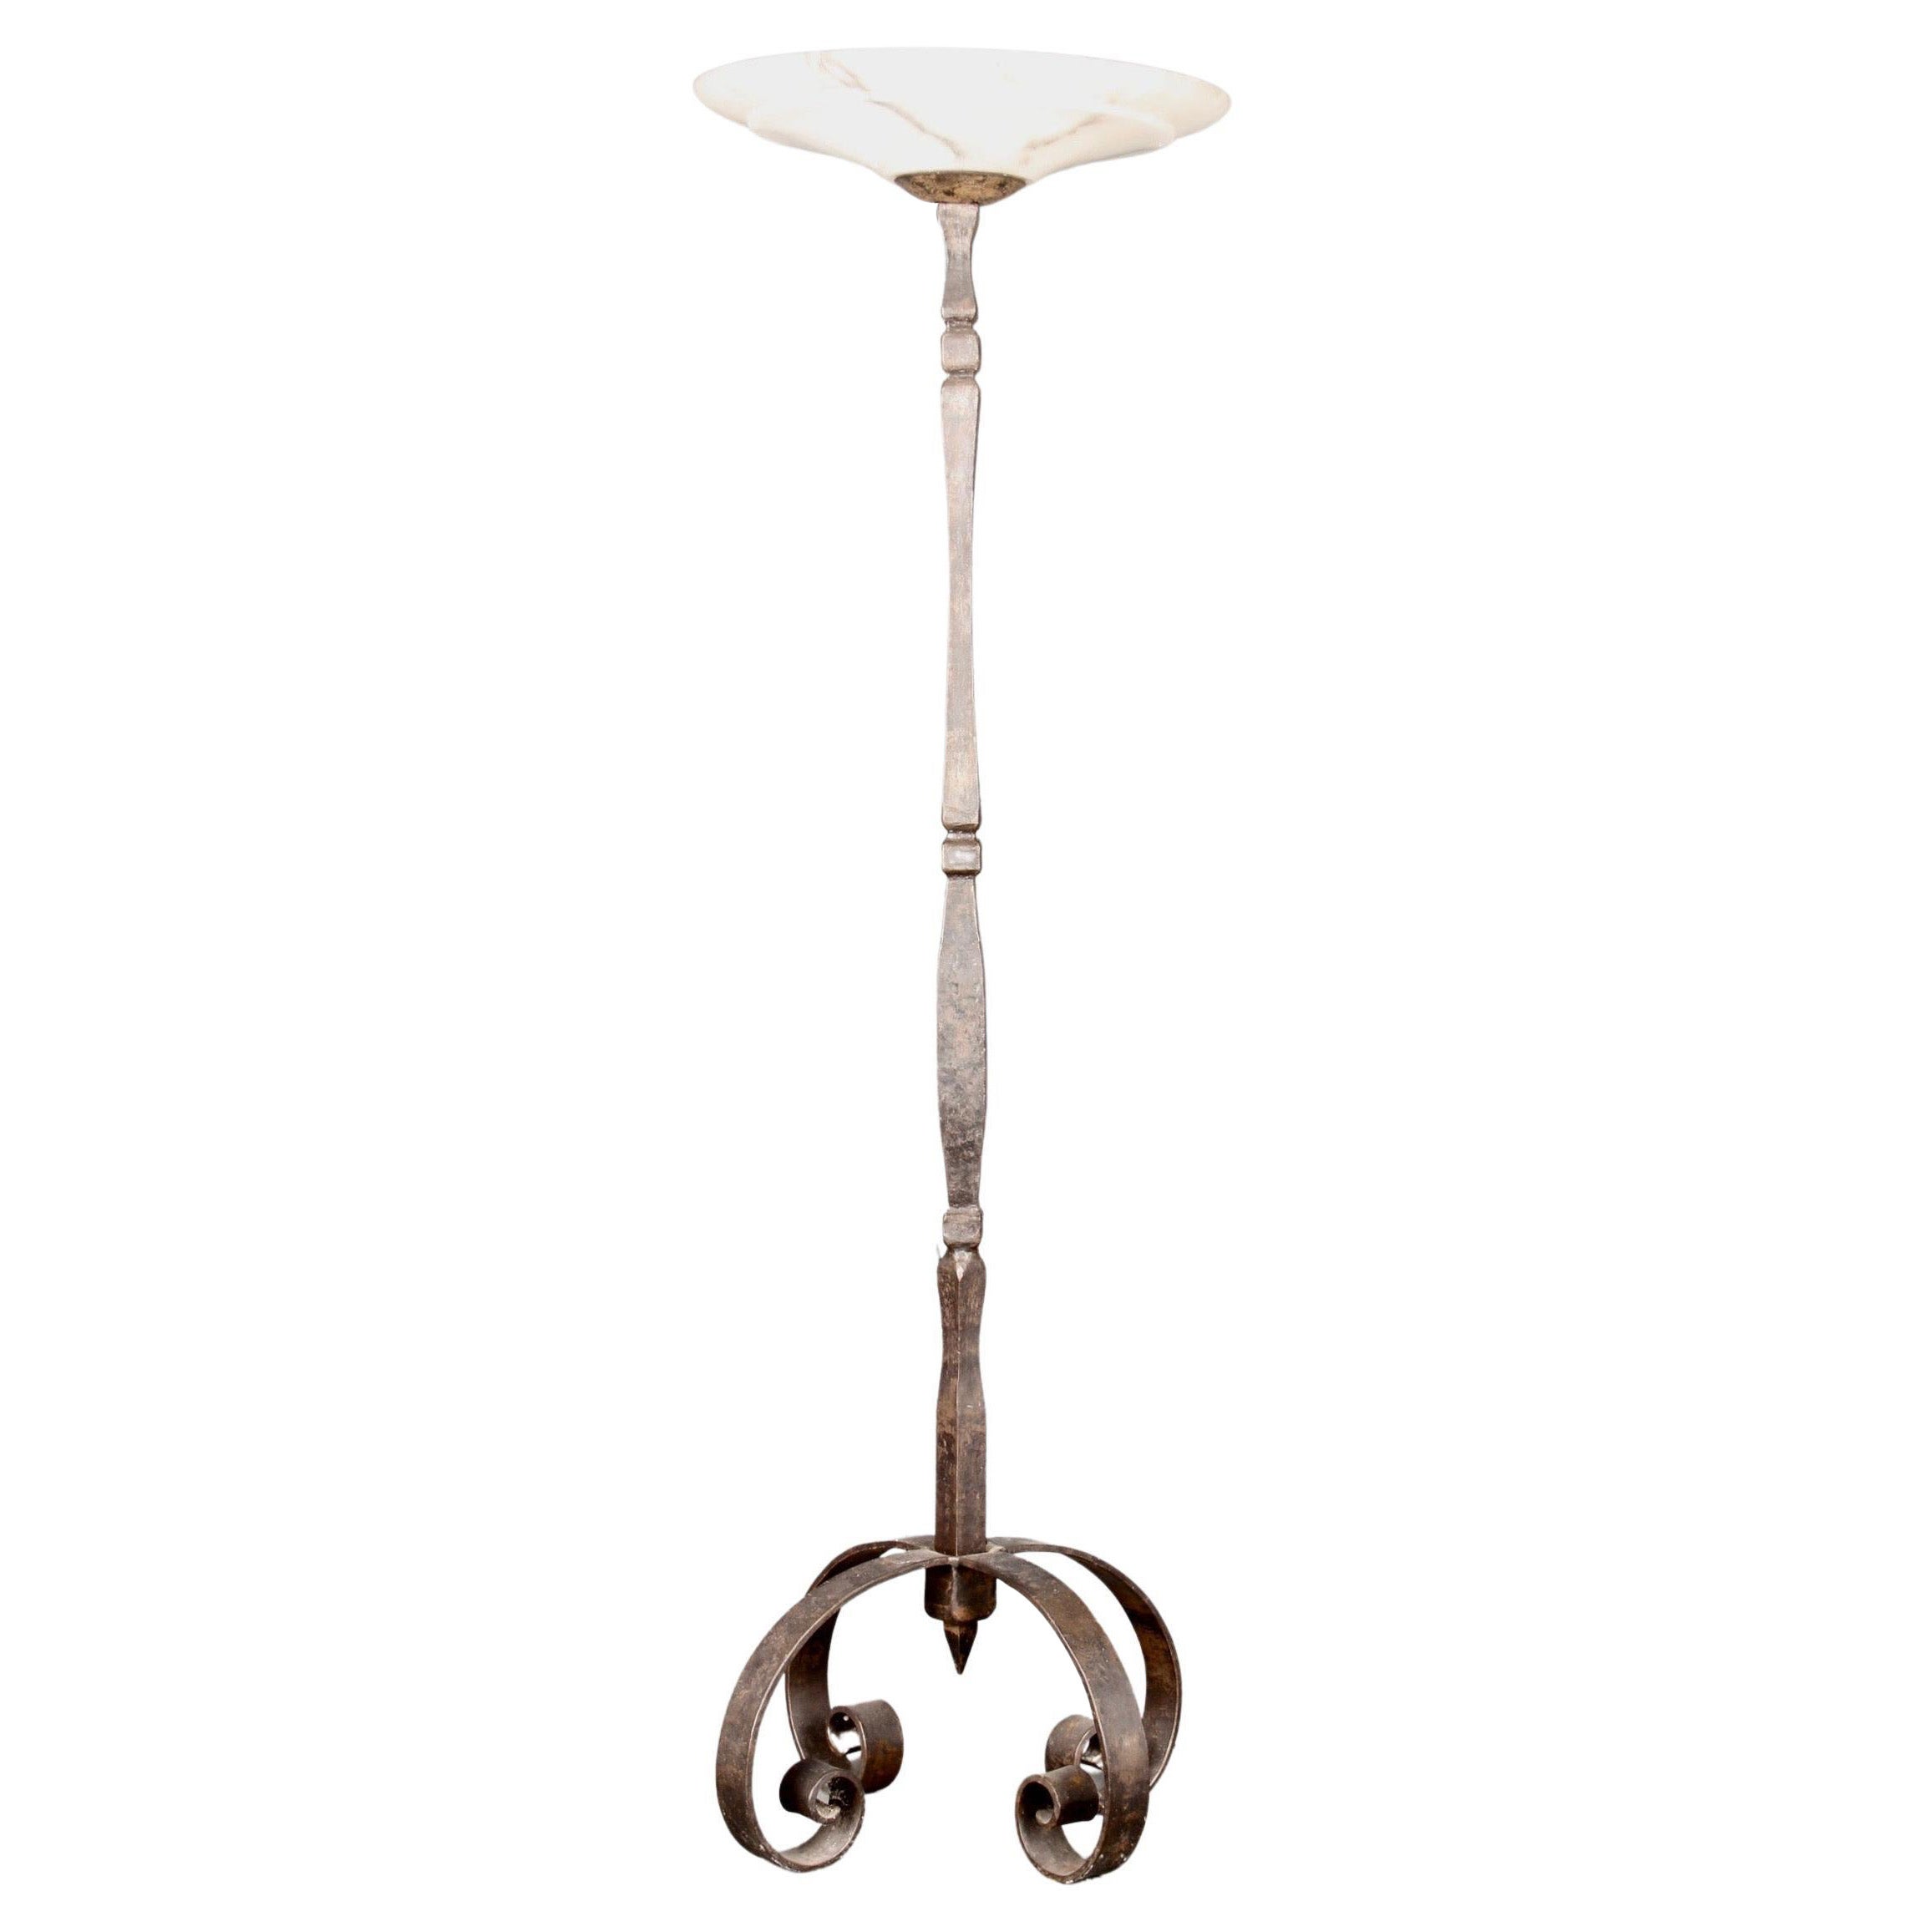 Wrought Iron and Alabaster Art Deco Floor Lamp